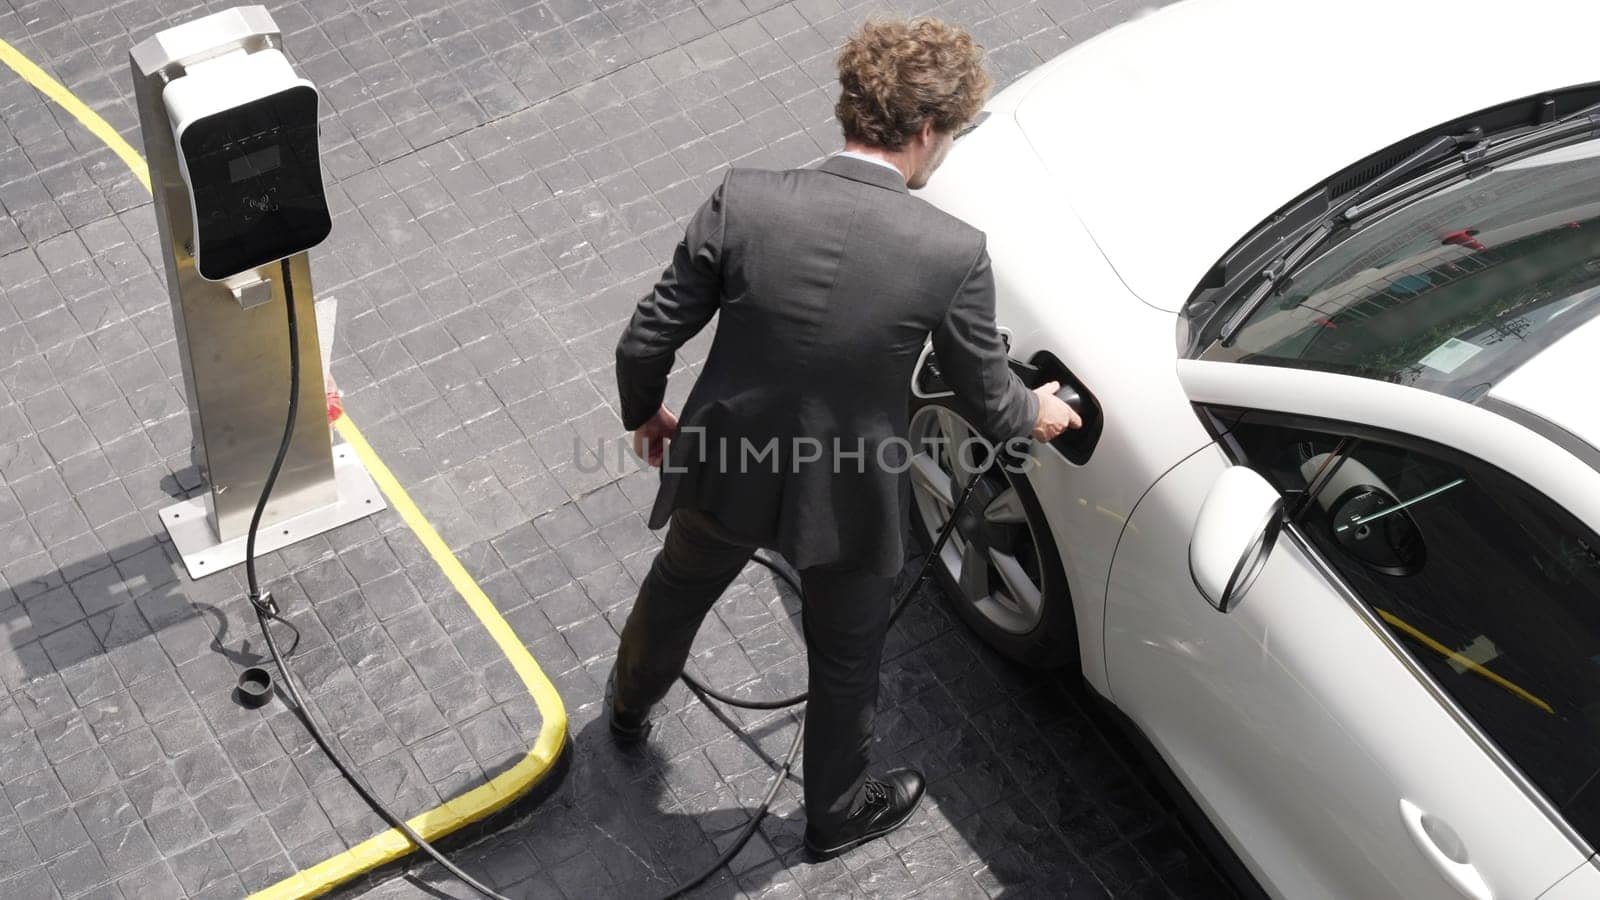 Progressive businessman install charger plug from charging station to his electric car before driving around city center. Eco friendly rechargeable car powered by sustainable and clean energy.